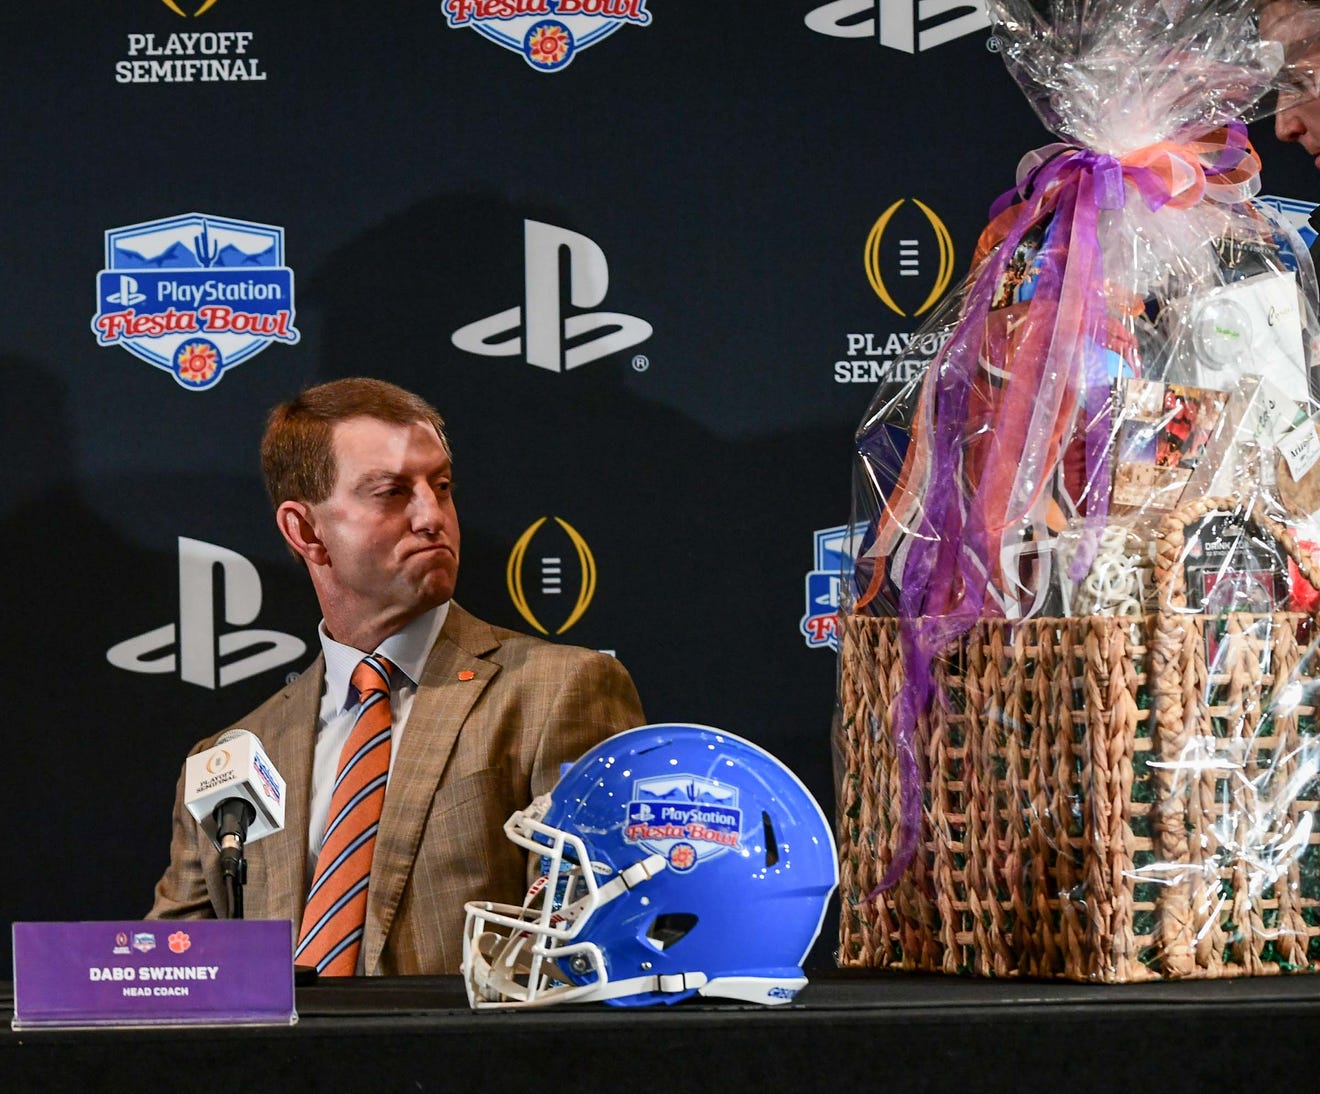 Fiesta Bowl coaches press conference Highlights from Swinney and Day